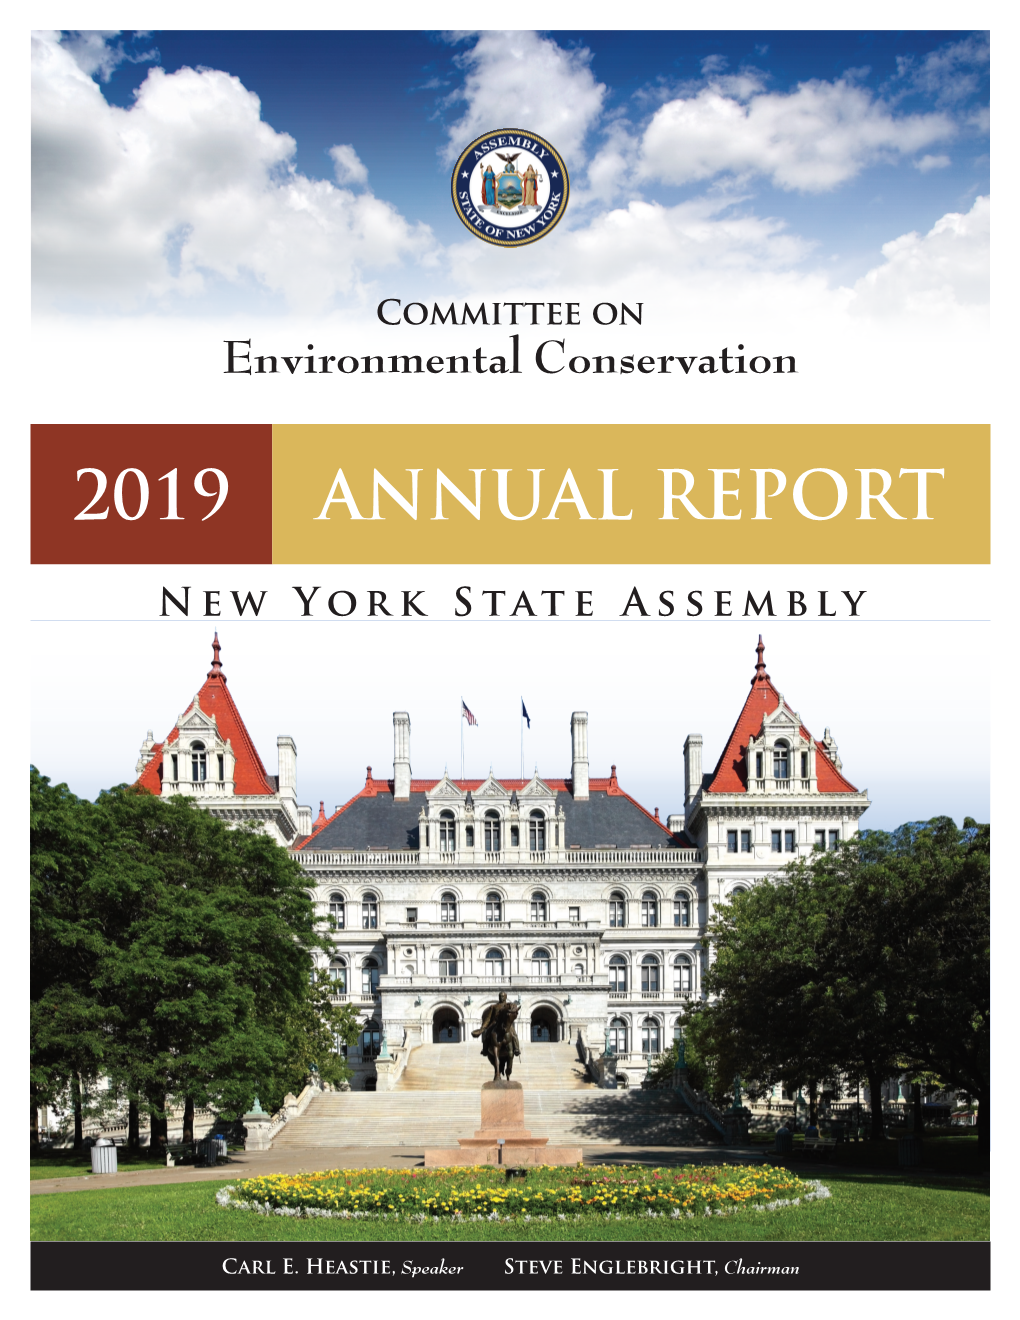 2019 ANNUAL REPORT New York State